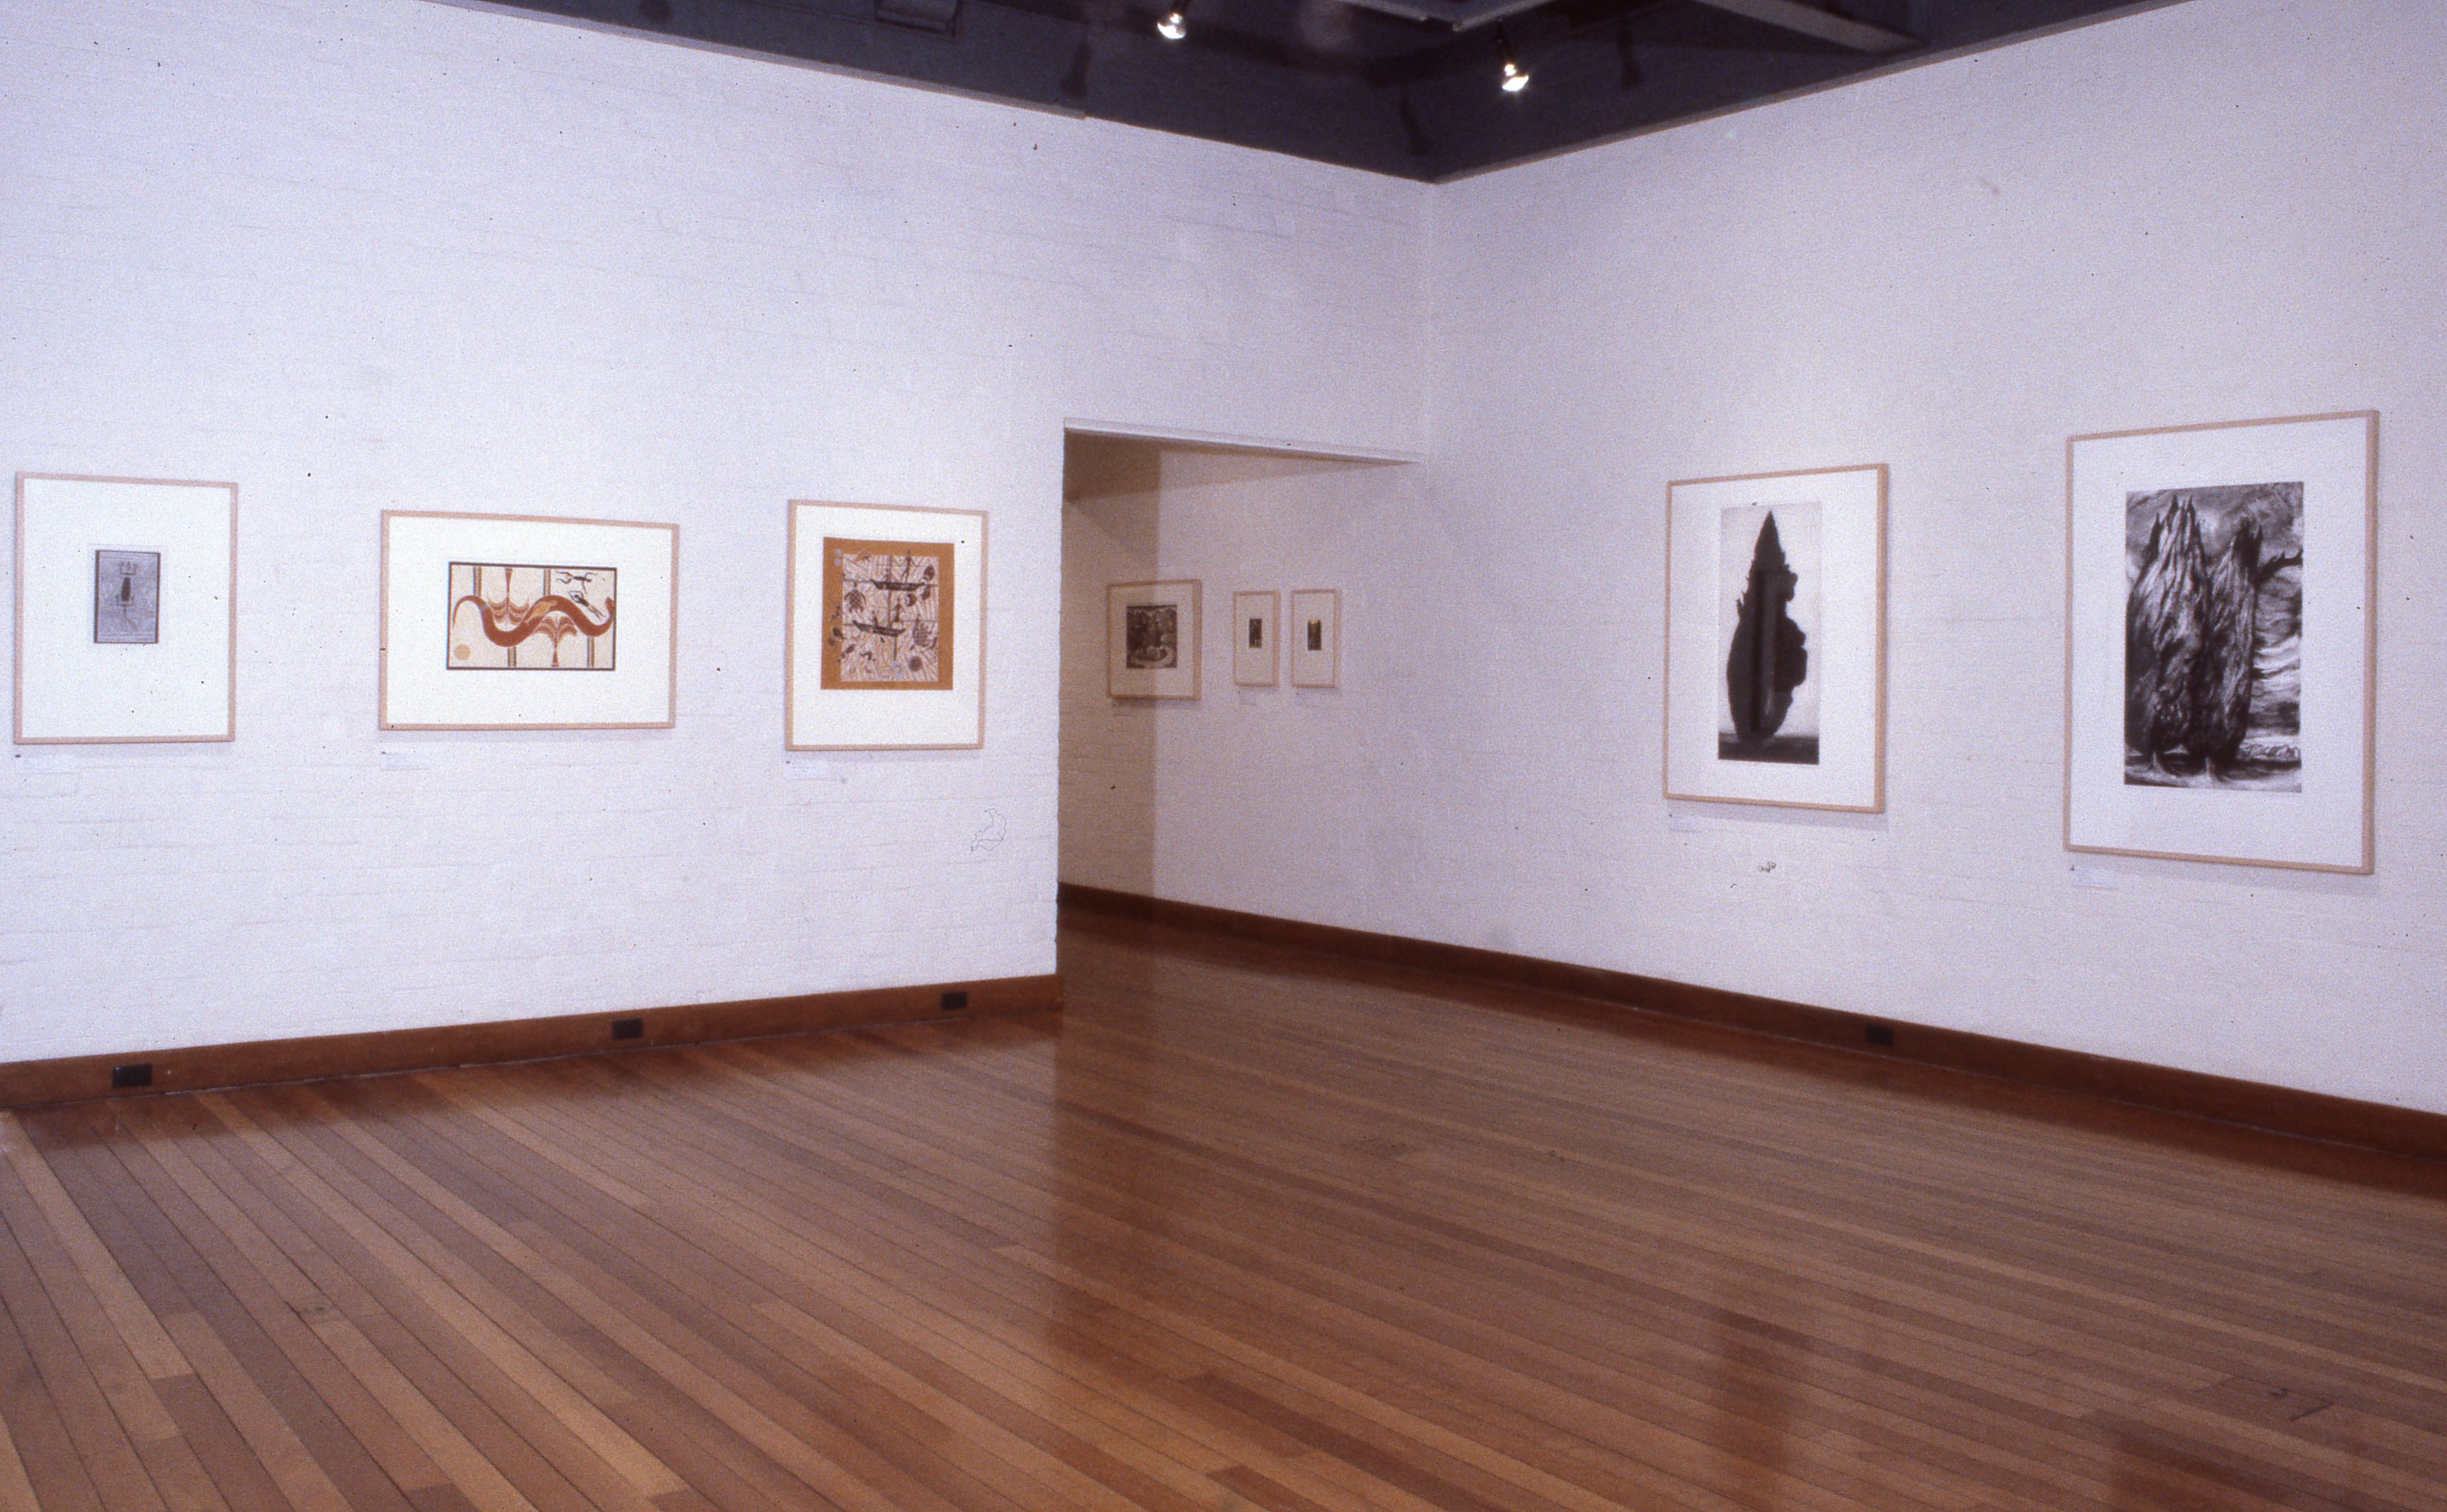 idg_archive_1991_what_happened_to_the_gum_trees_the_michelton_print_exhibition_002_install.jpg